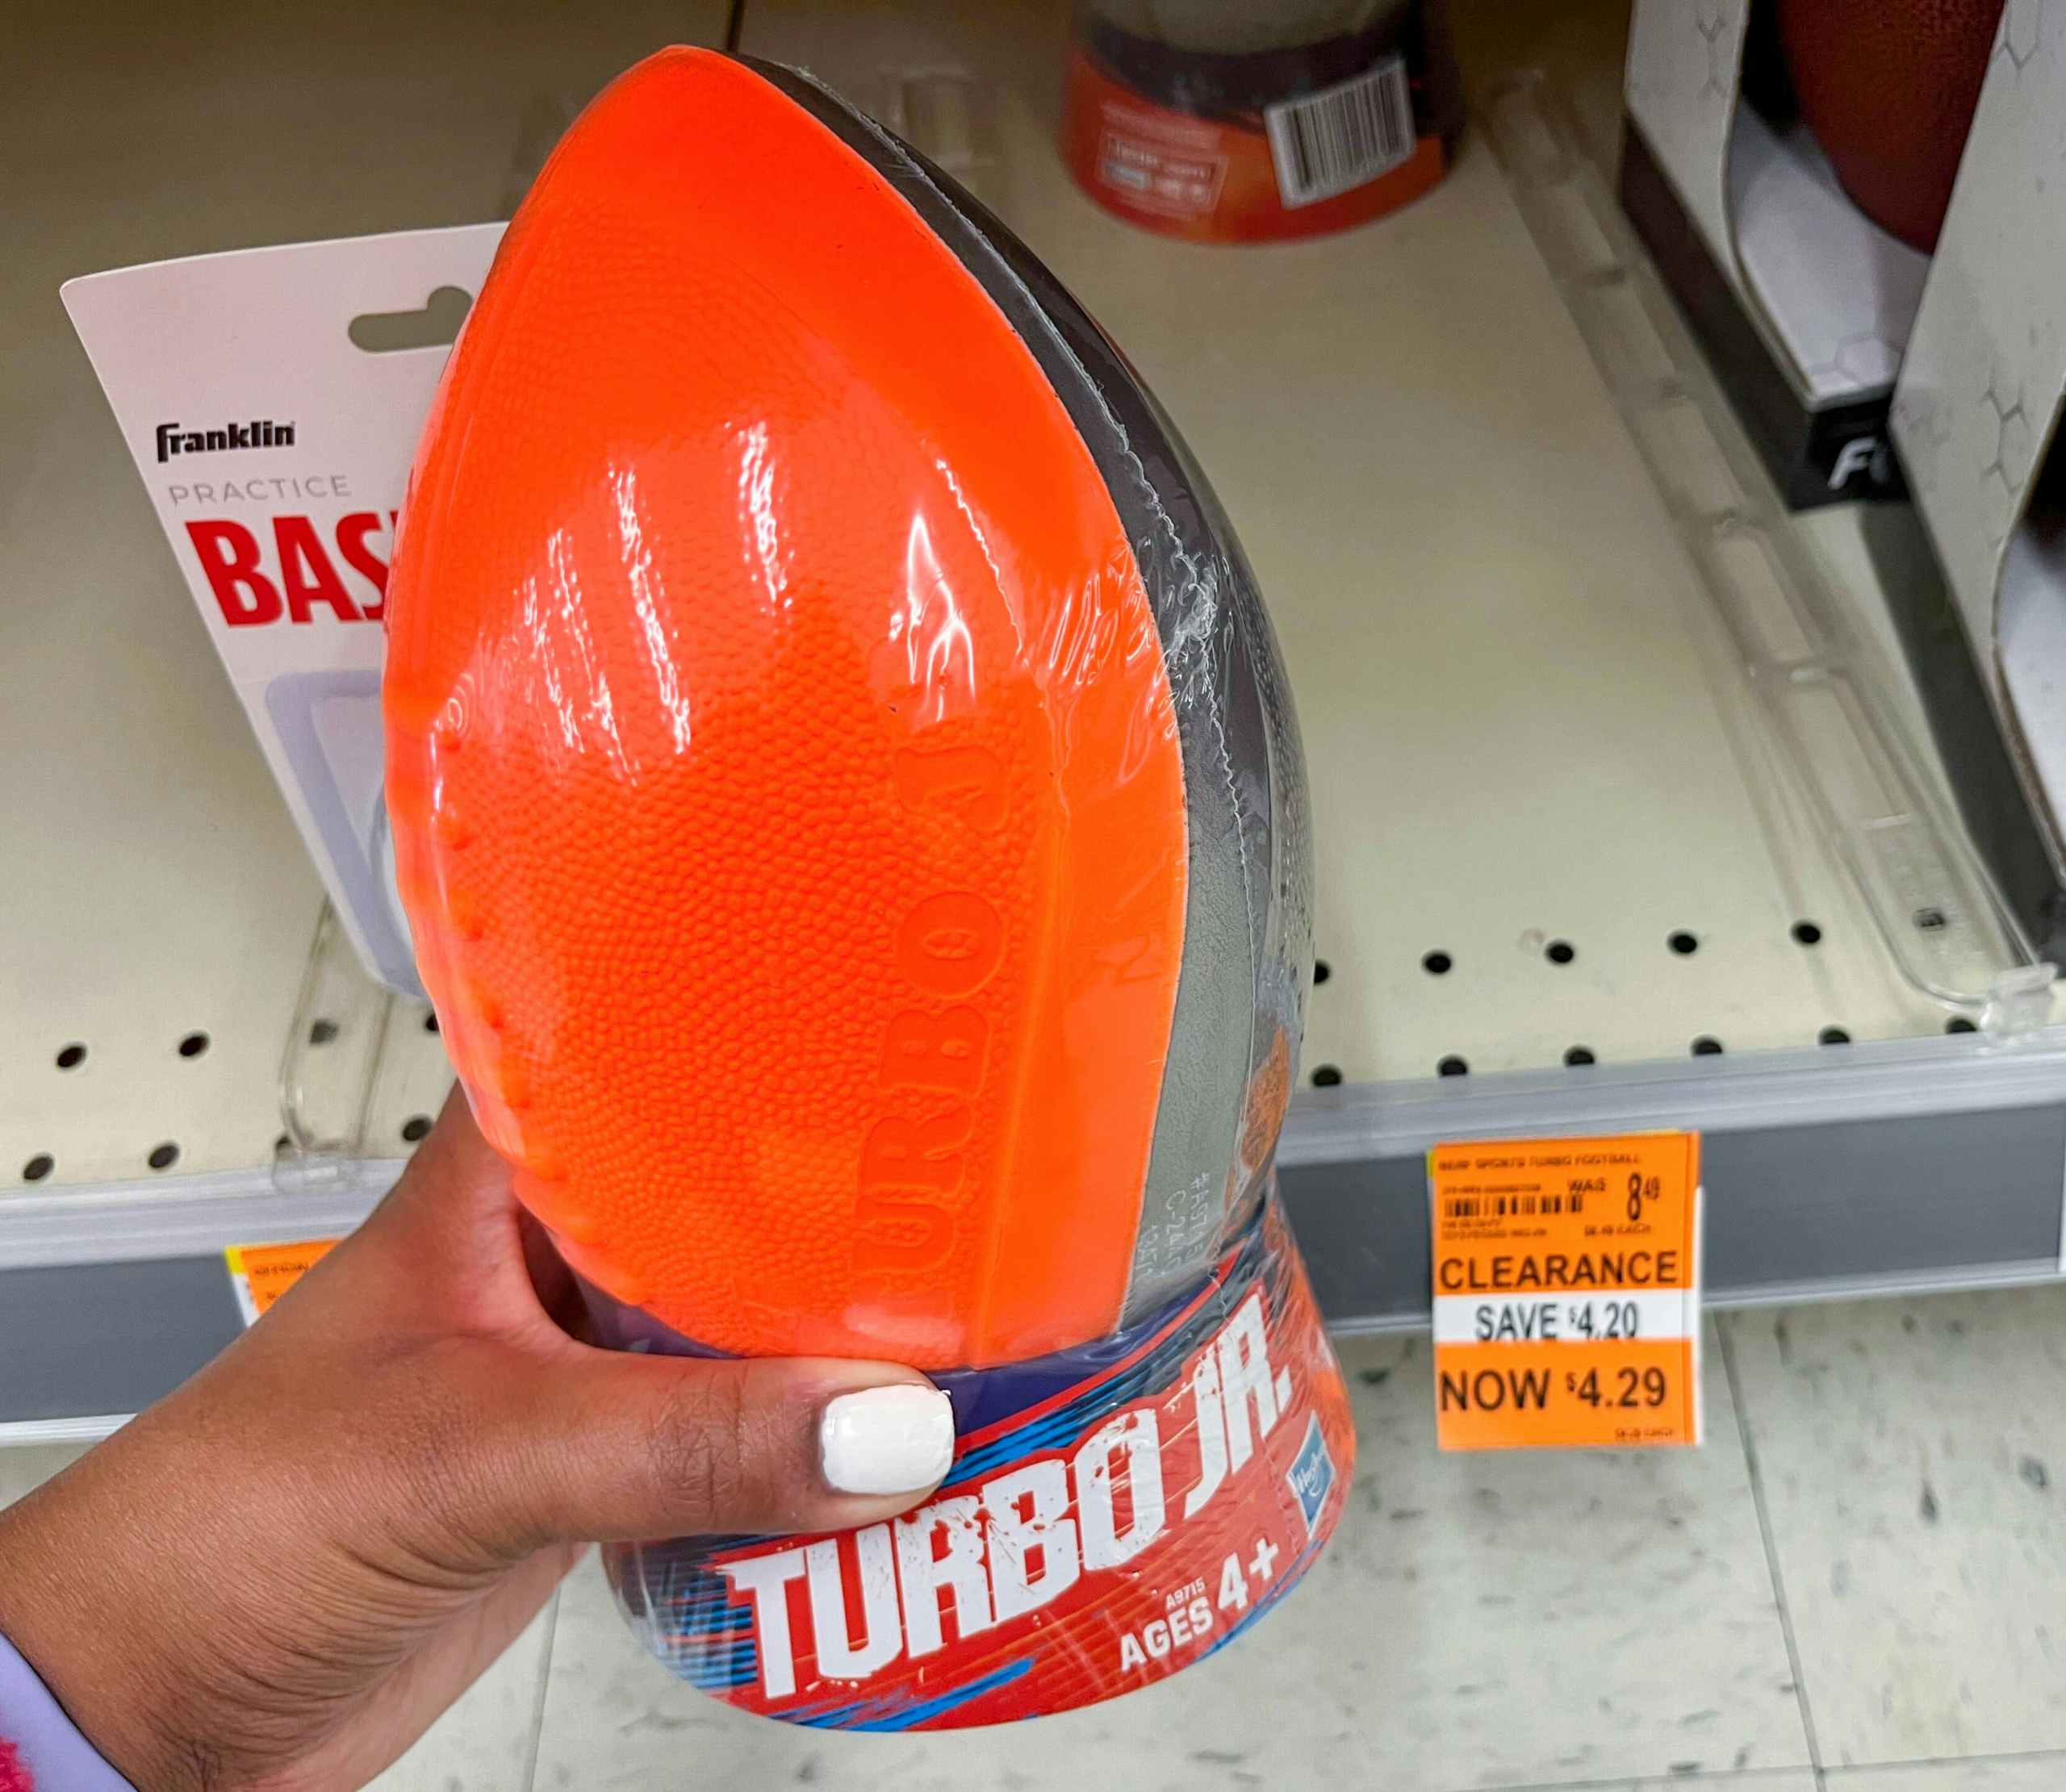 hand holding Turbo Jr football next to clearance tag